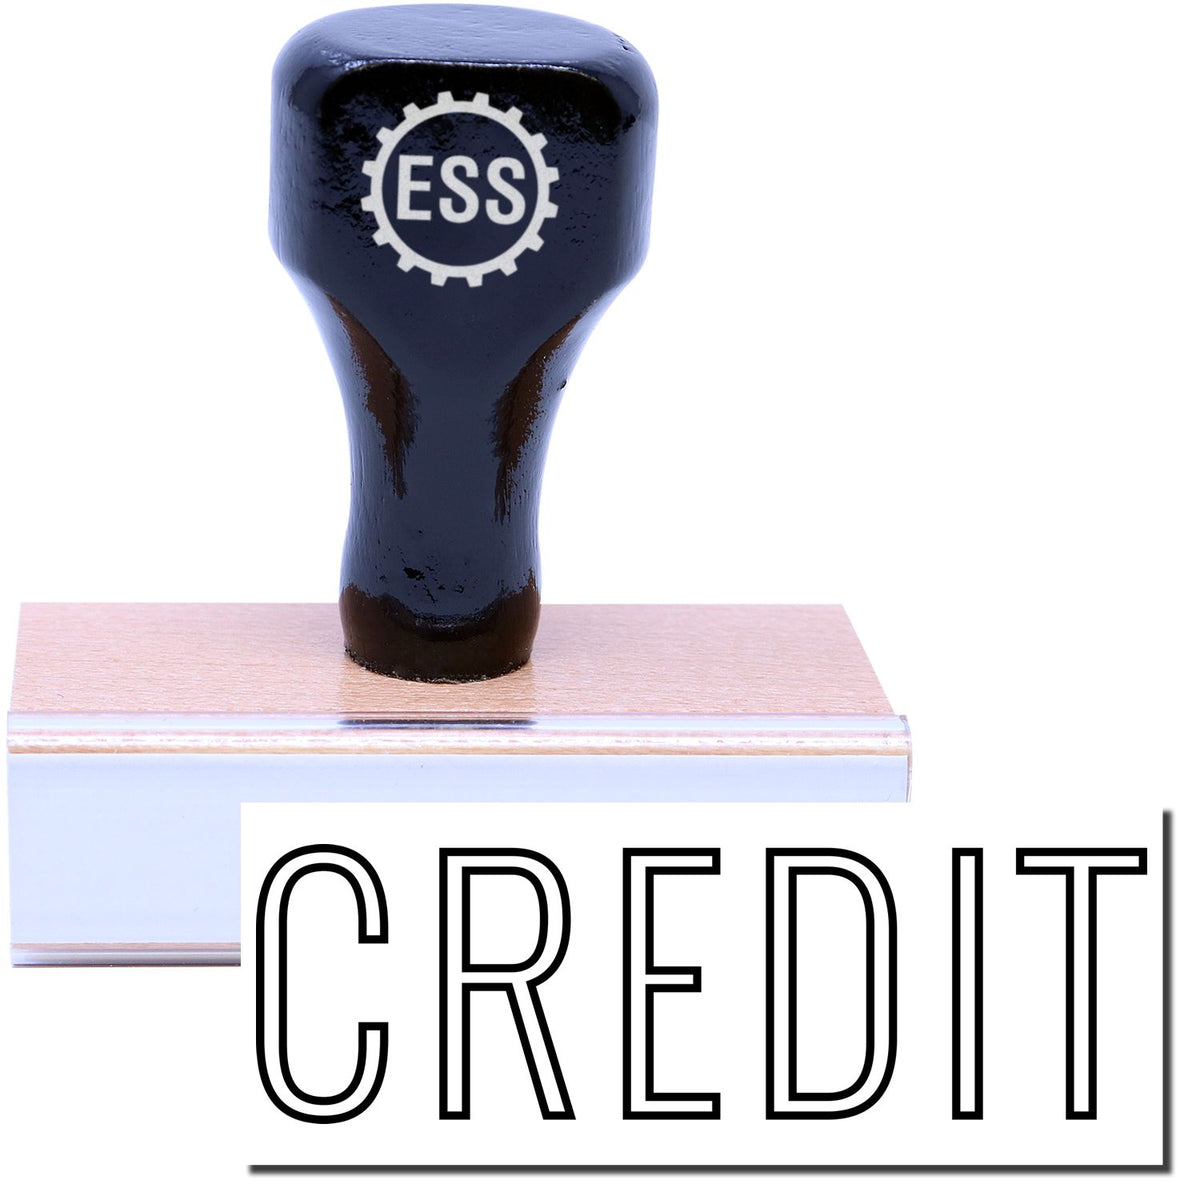 A stock office rubber stamp with a stamped image showing how the text &quot;CREDIT&quot; in an outline font is displayed after stamping.